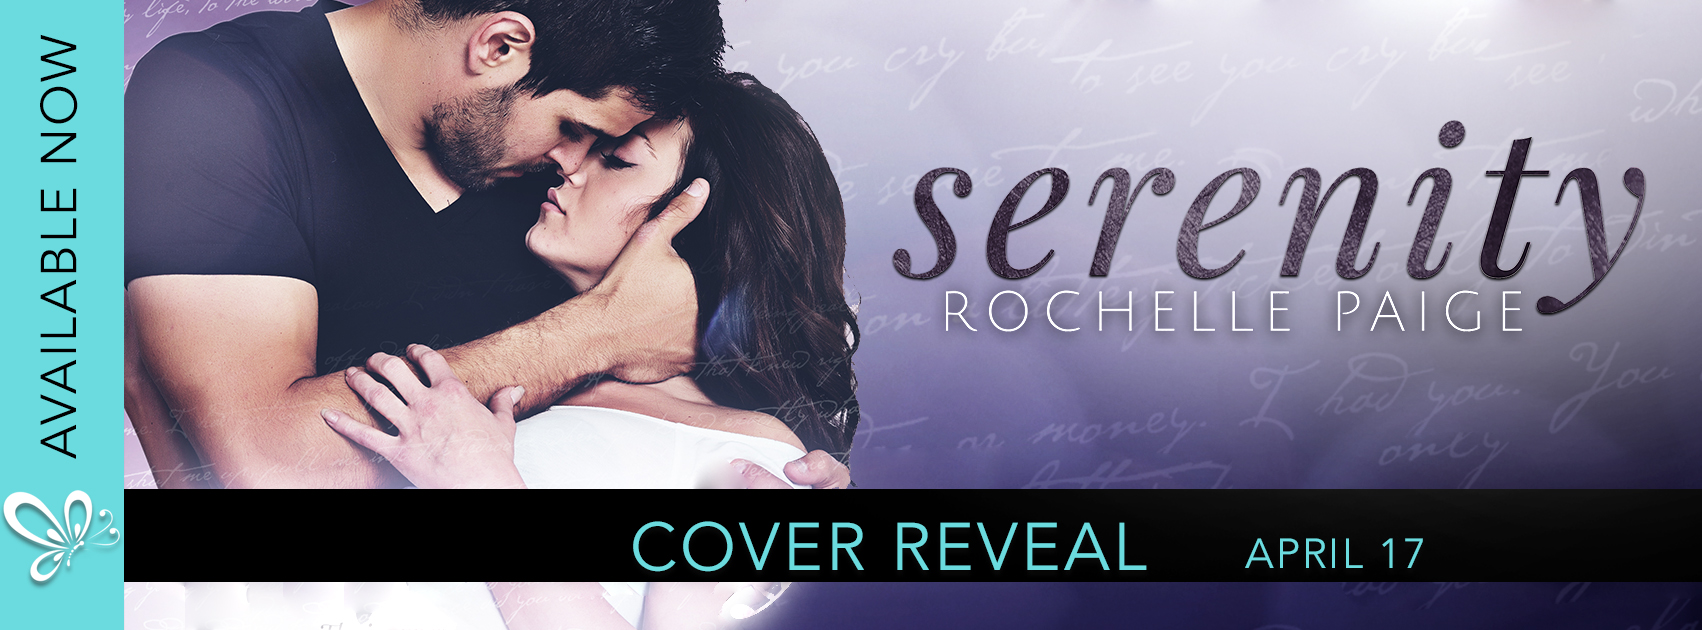 SERENITY_COVER REVEAL1